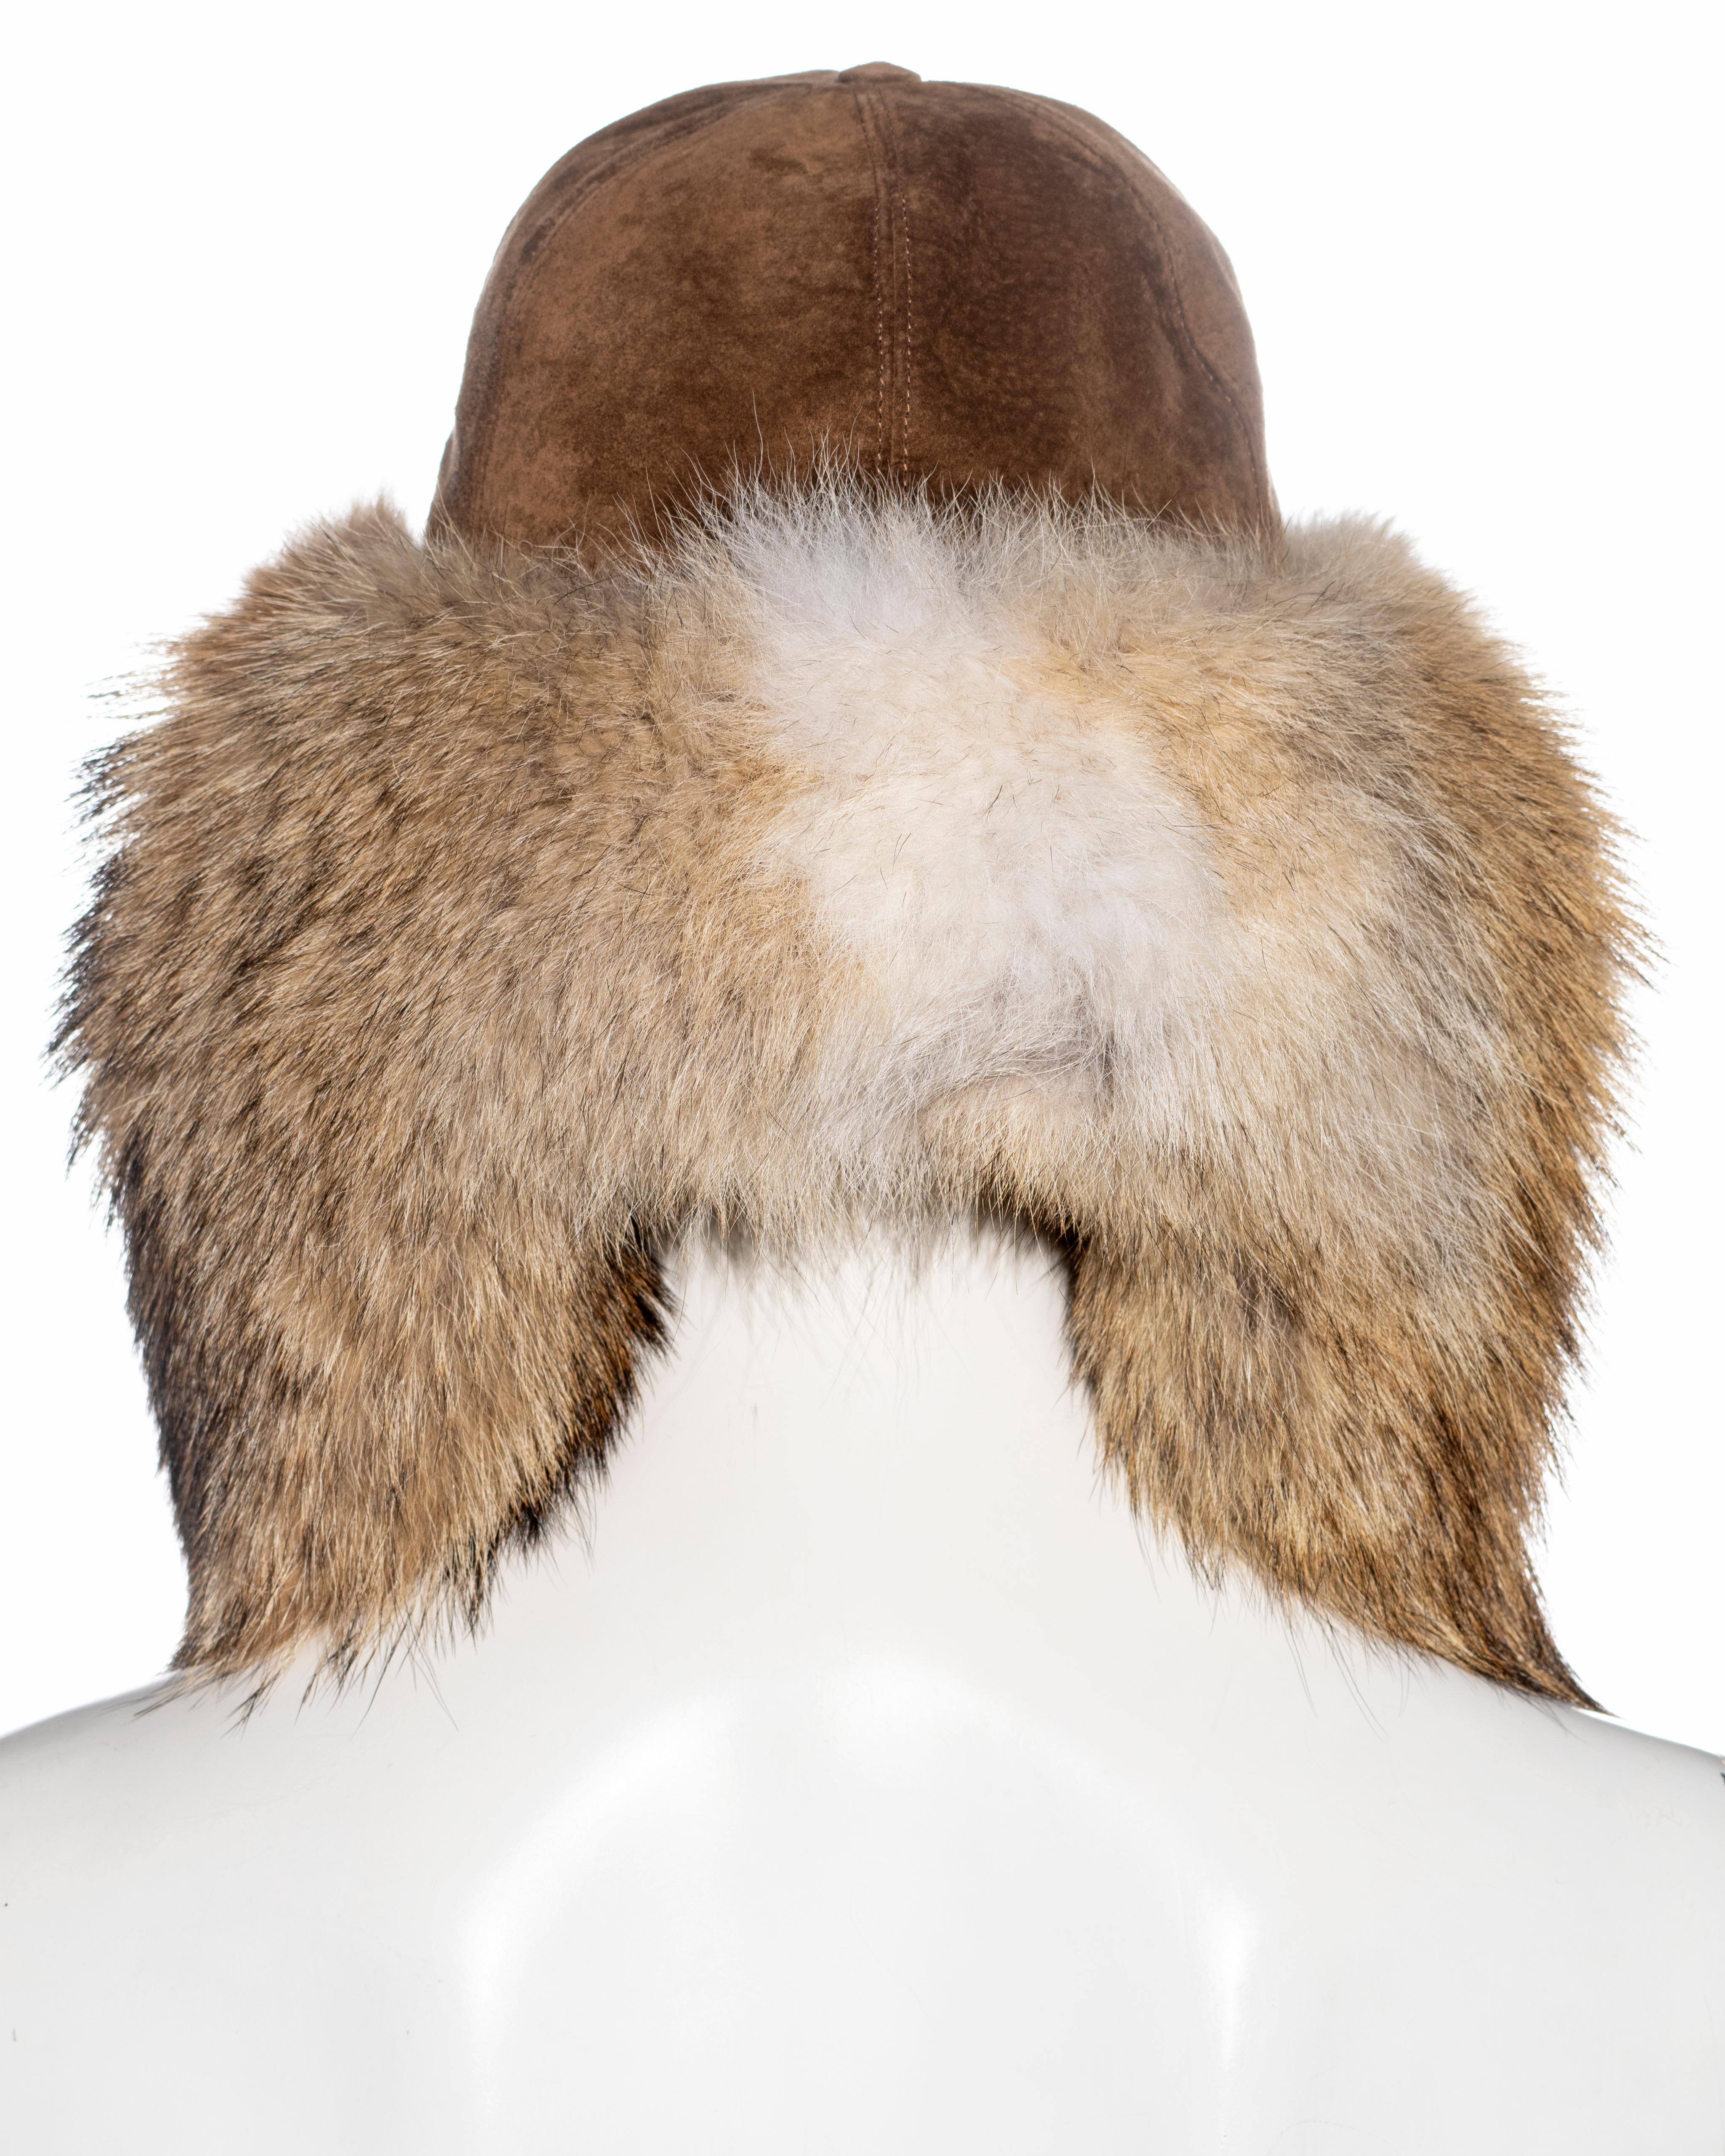 Christian Dior by John Galliano brown leather and coyote fur hat, ss 2002 1